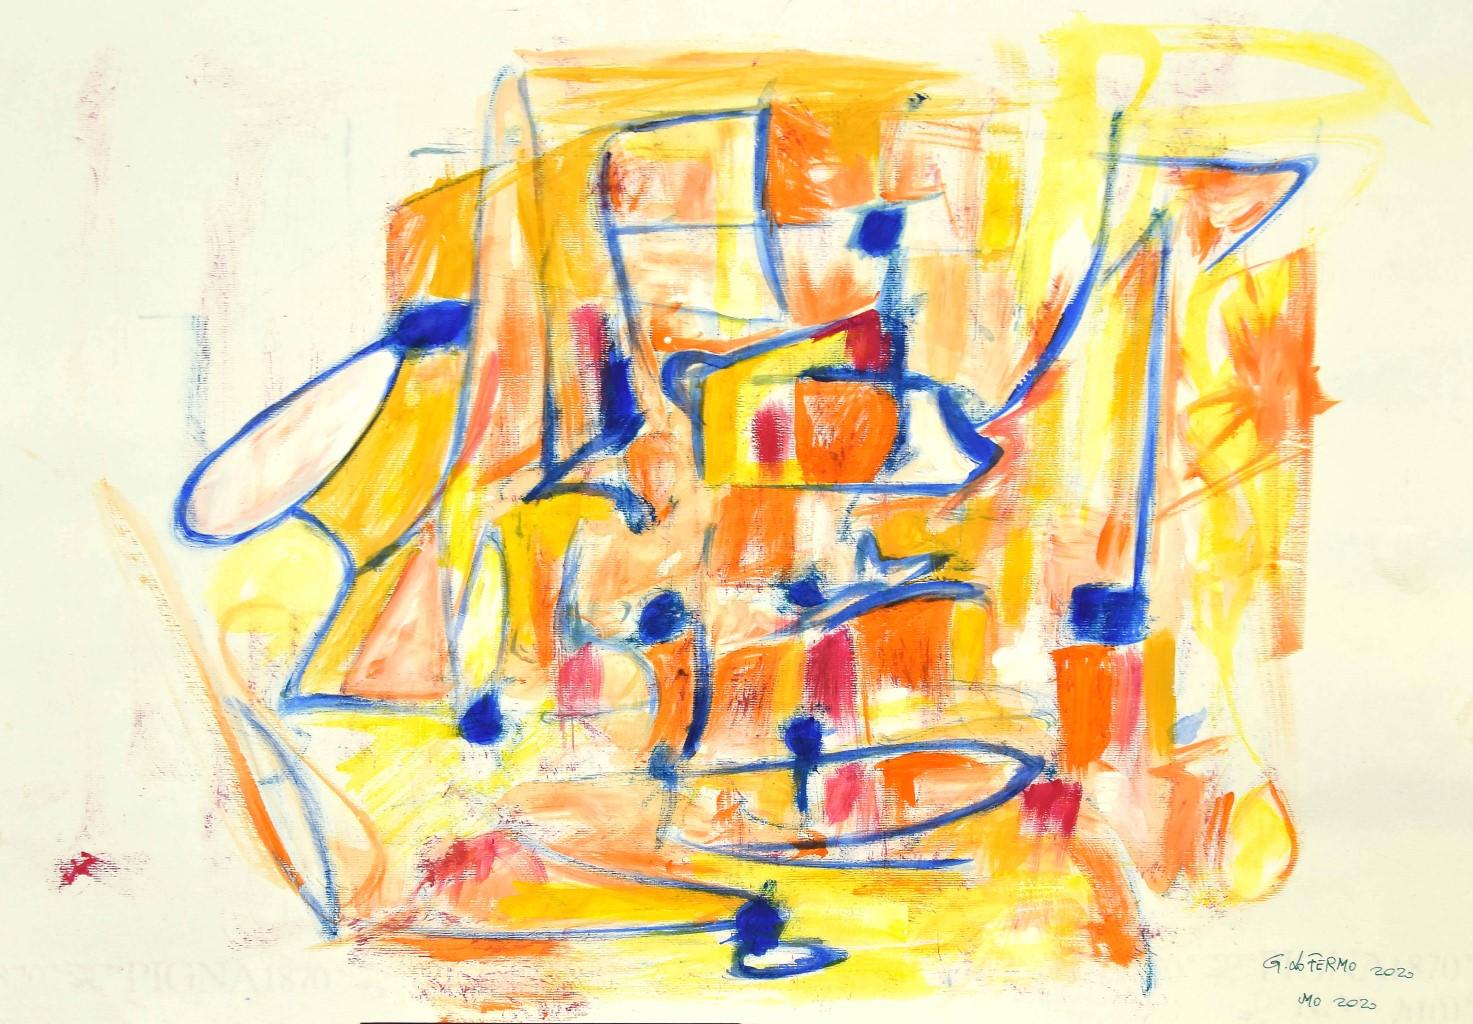 Geometrical Abstract Composition - Mixed Media on Paper by G. Lo Fermo - 2020